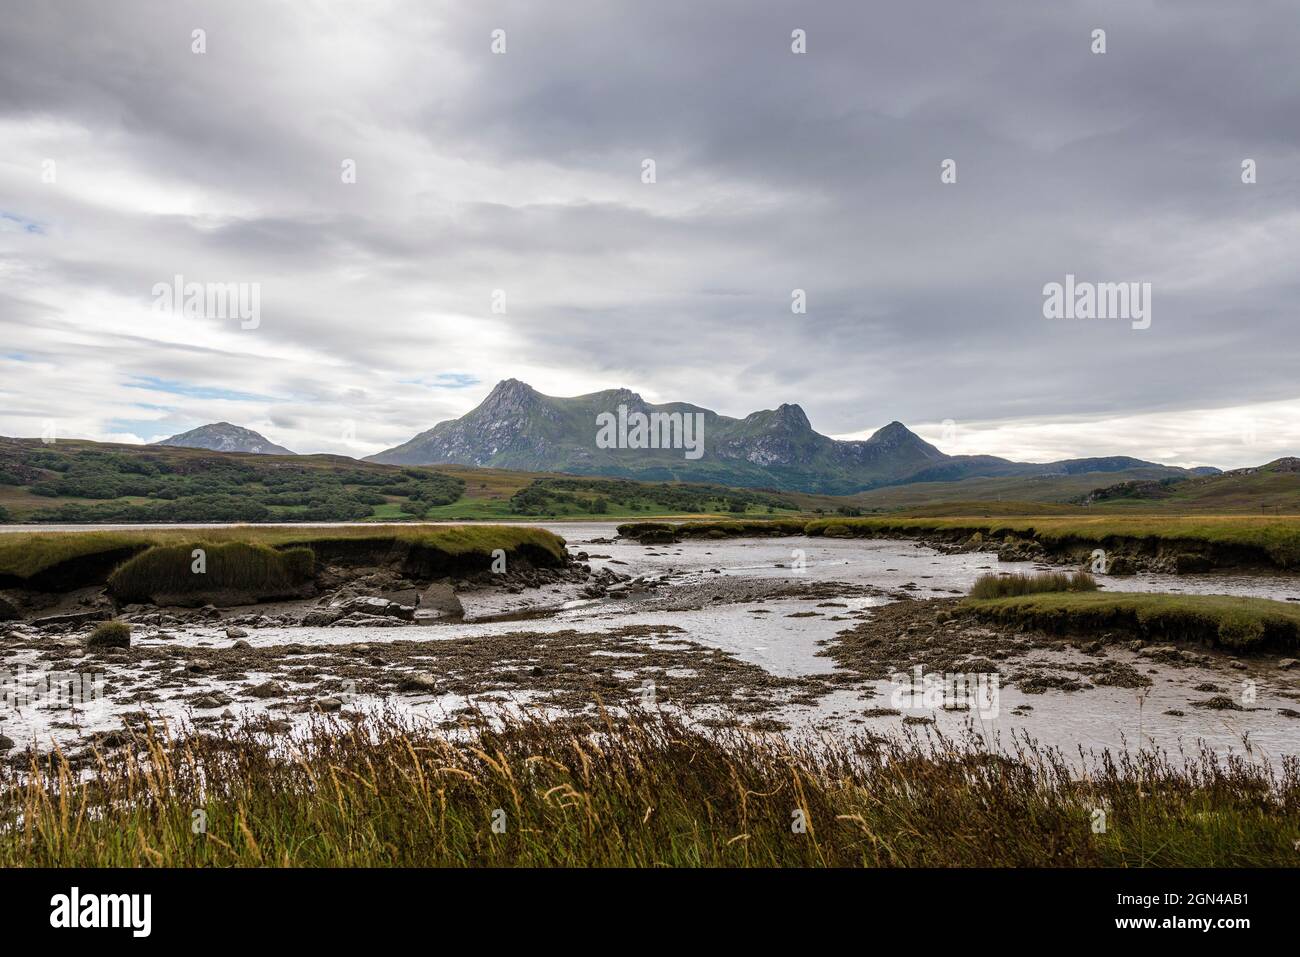 The jagged peaks of Ben Loyal rise beyond the intertidal muddy foreshore of the  Kyle of Tongue near the NC500, northern Scotland, on  a cloudy day. Stock Photo